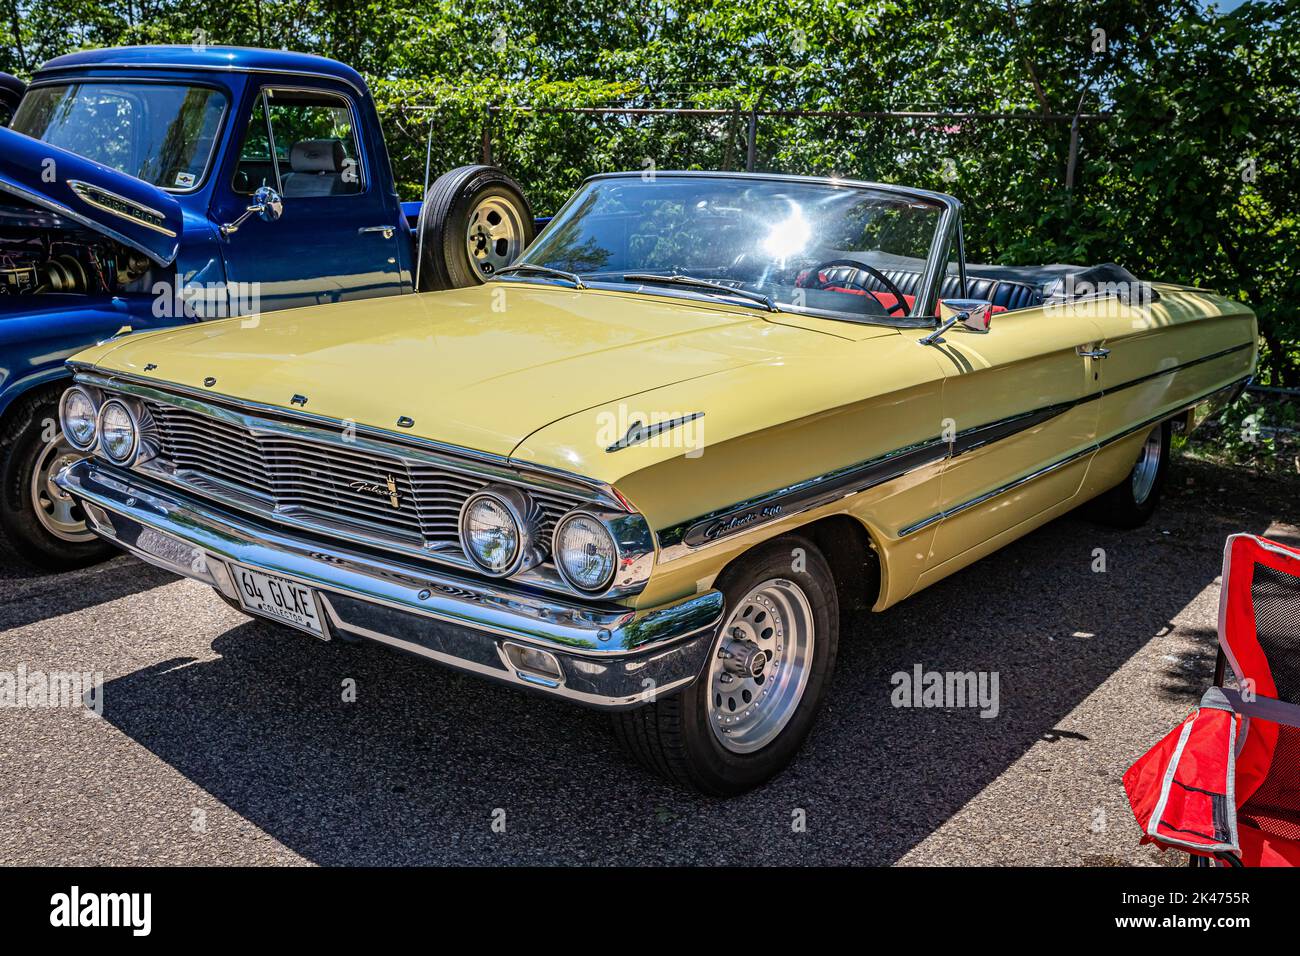 Falcon Heights, MN - June 18, 2022: High perspective front corner view of a 1964 Ford Galaxie 500 Convertible at a local car show. Stock Photo